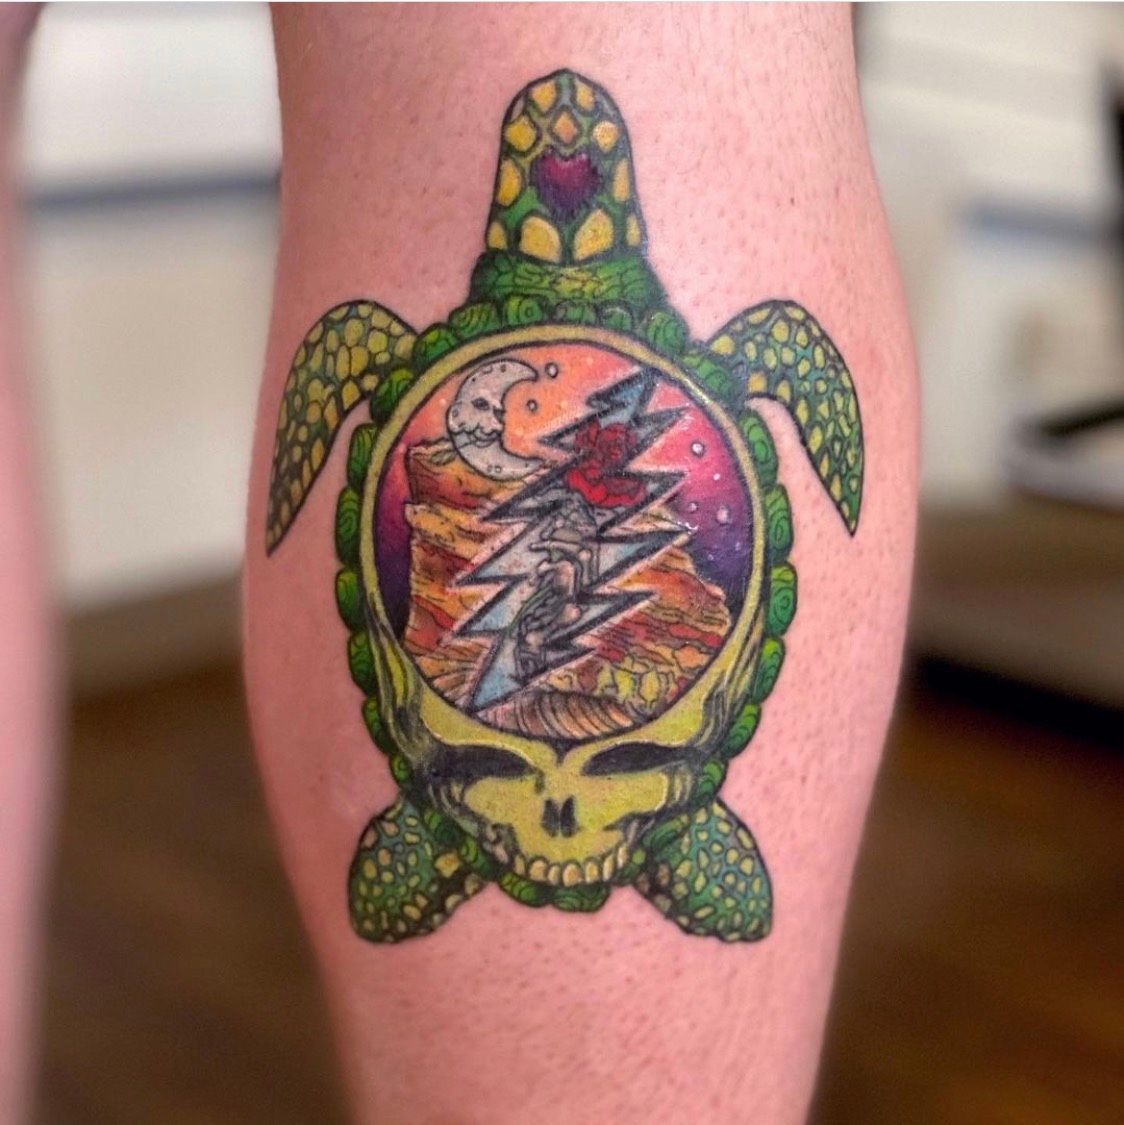 Had a blast with this Grateful Dead piece  Scrolller